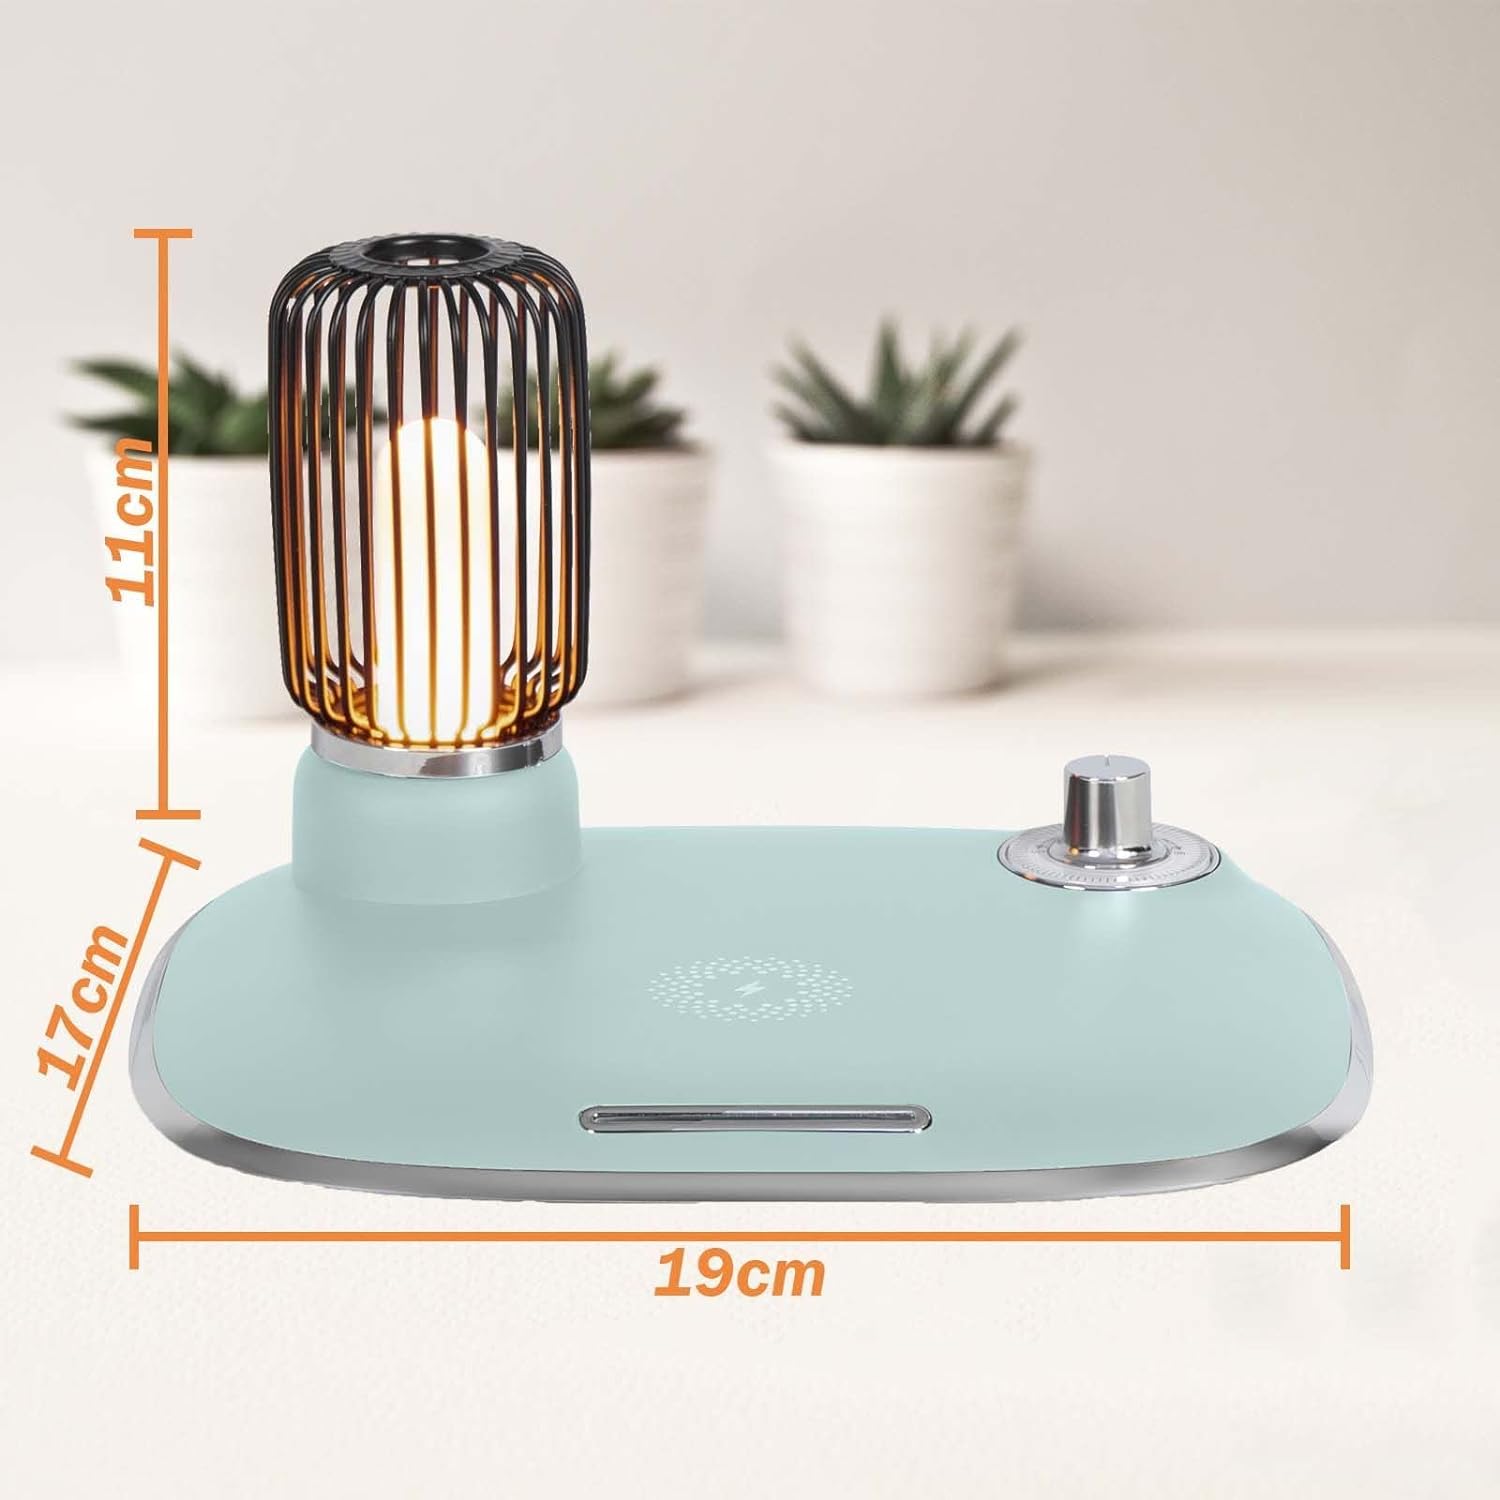 15W Charging Pad Bedside Desk Table Lamp LED with Wireless Charger